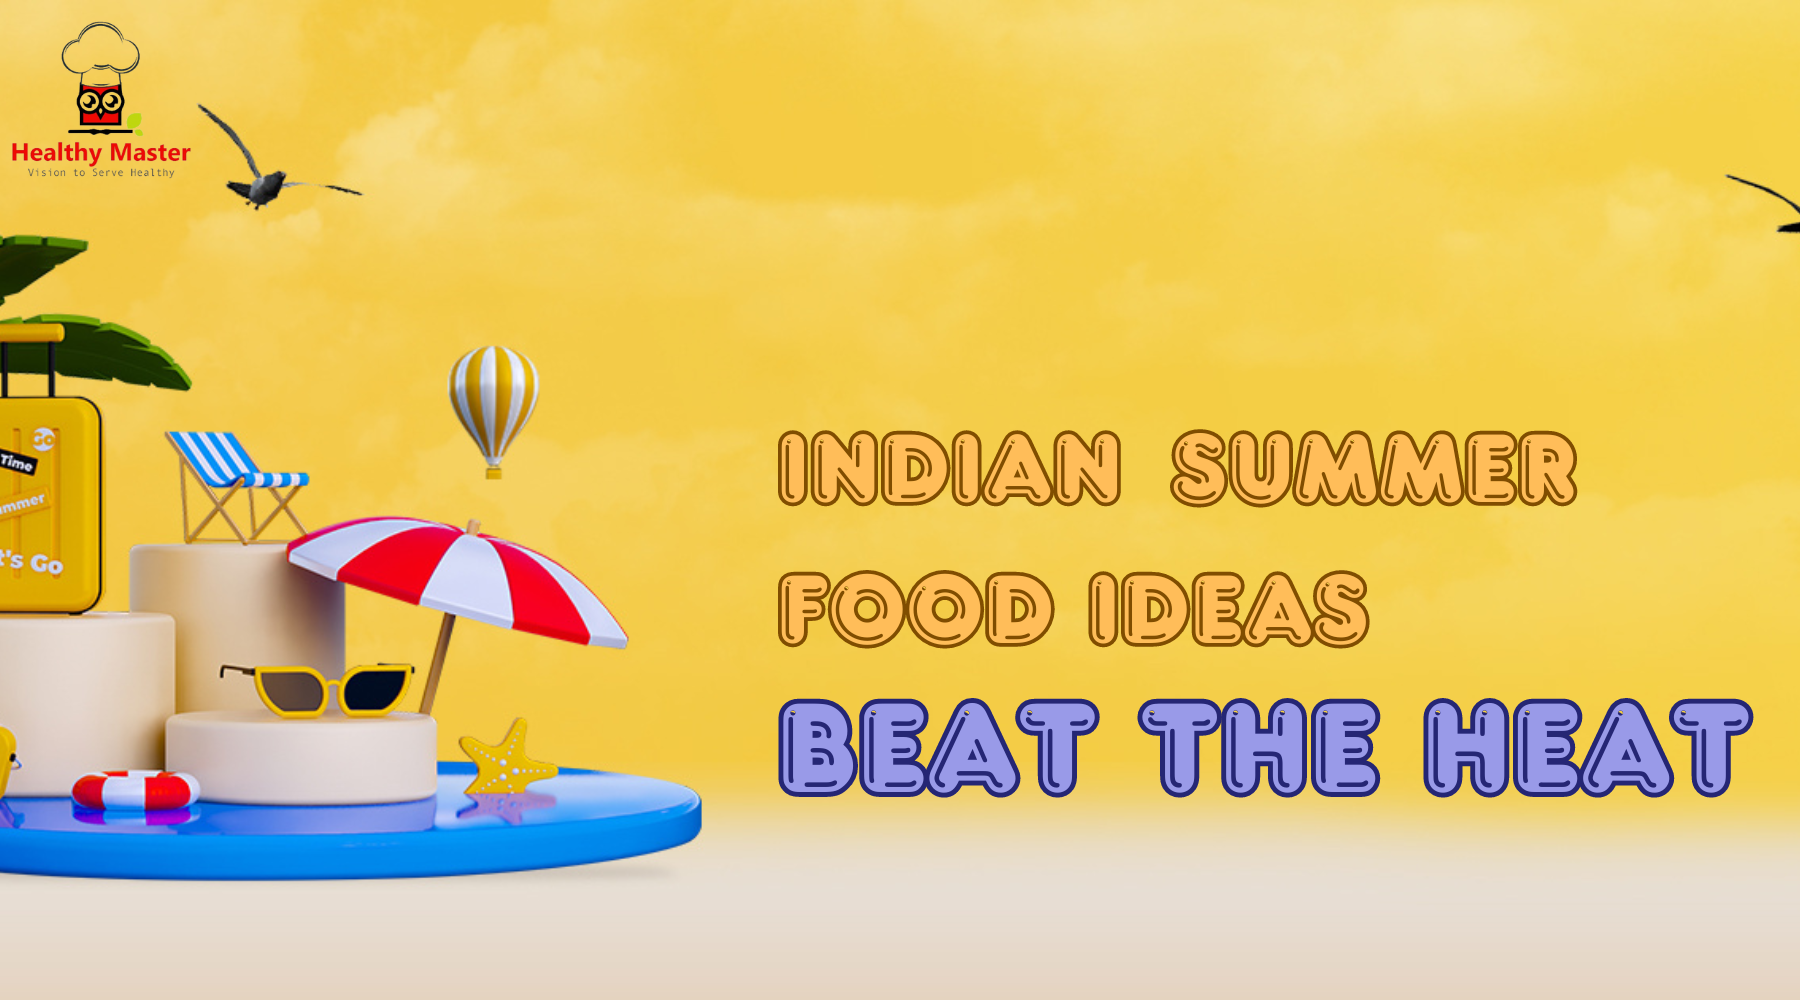 Indian Summer Food Ideas to Beat the Heat